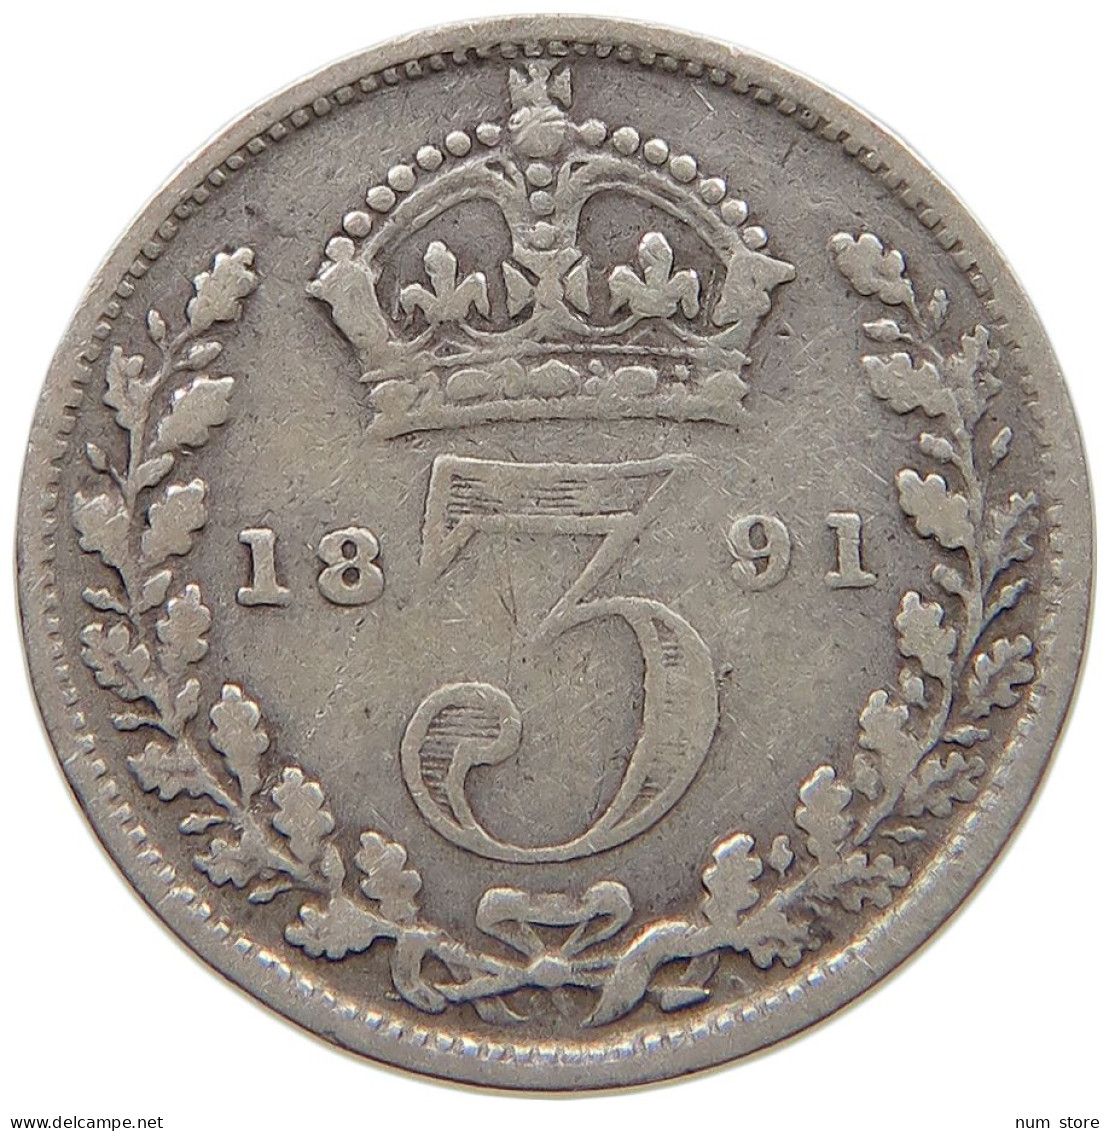 GREAT BRITAIN THREEPENCE 1891 Victoria 1837-1901 #c019 0159 - F. 3 Pence